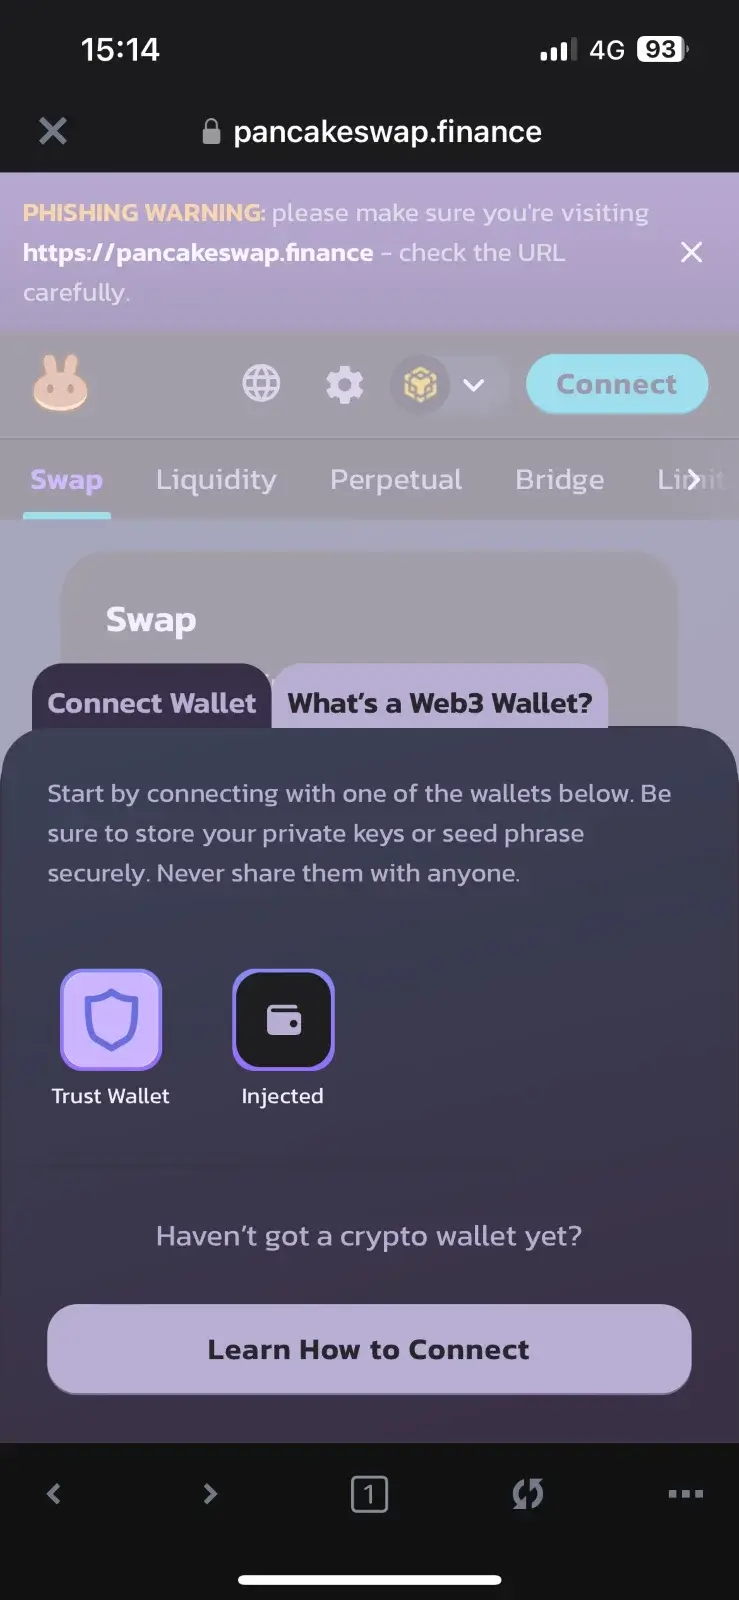 Step 3: Connect Wallet